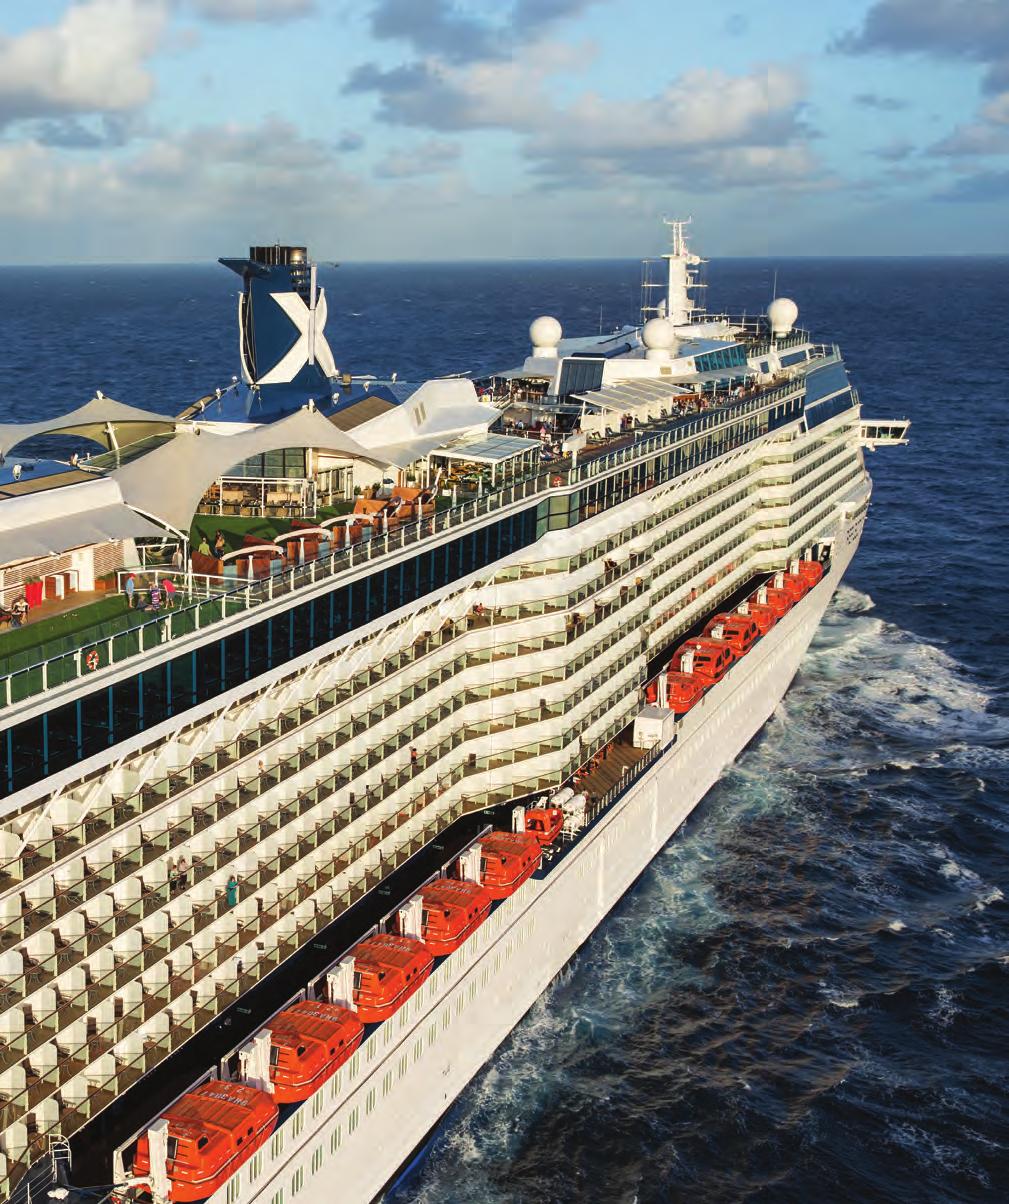 9 0 0 7 8 8 7 9 Occupancy:,88 Tonnage:,00 Length:,07 feet (9 metres) Electric Current: 0/0 AC Ship s Registry: Malta Entered Service: 0 8% of staterooms have a balcony wake 0 innovative restaurants